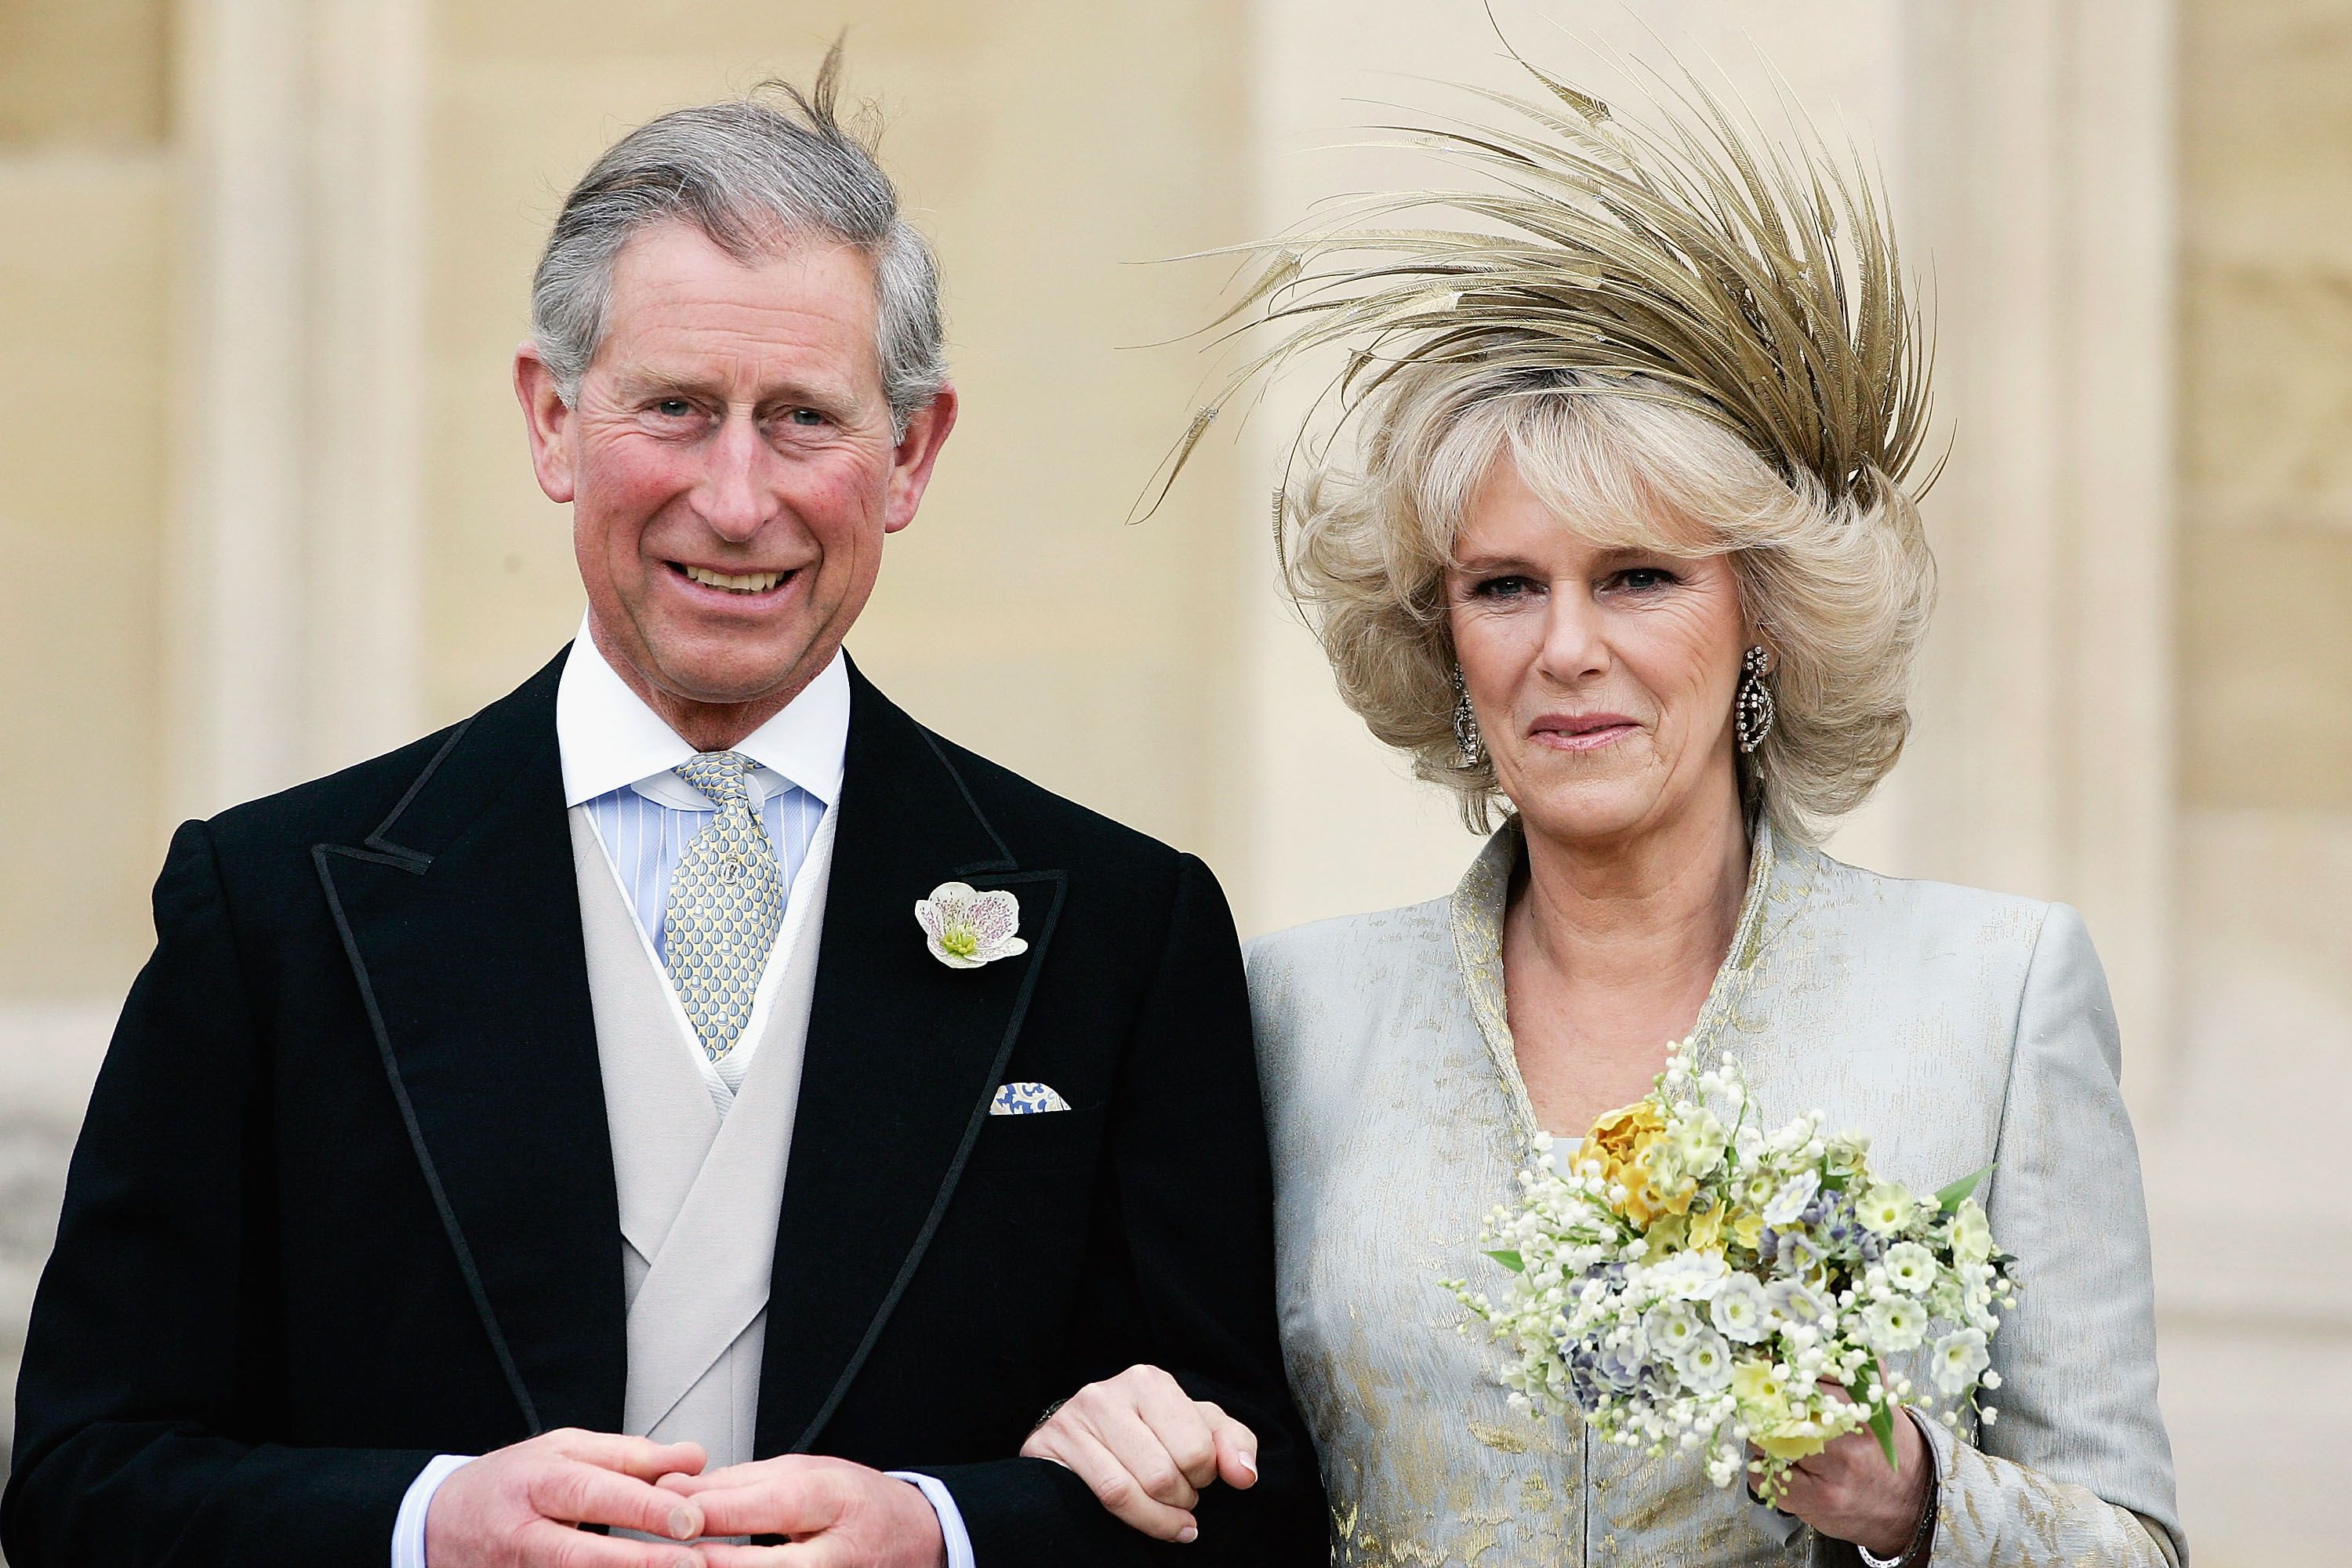  Prince Charles, and The Duchess Of Cornwall, Camilla Parker Bowles after their marriage blessing at Windsor Castle on April 9, 2005 | Photo: Getty Images